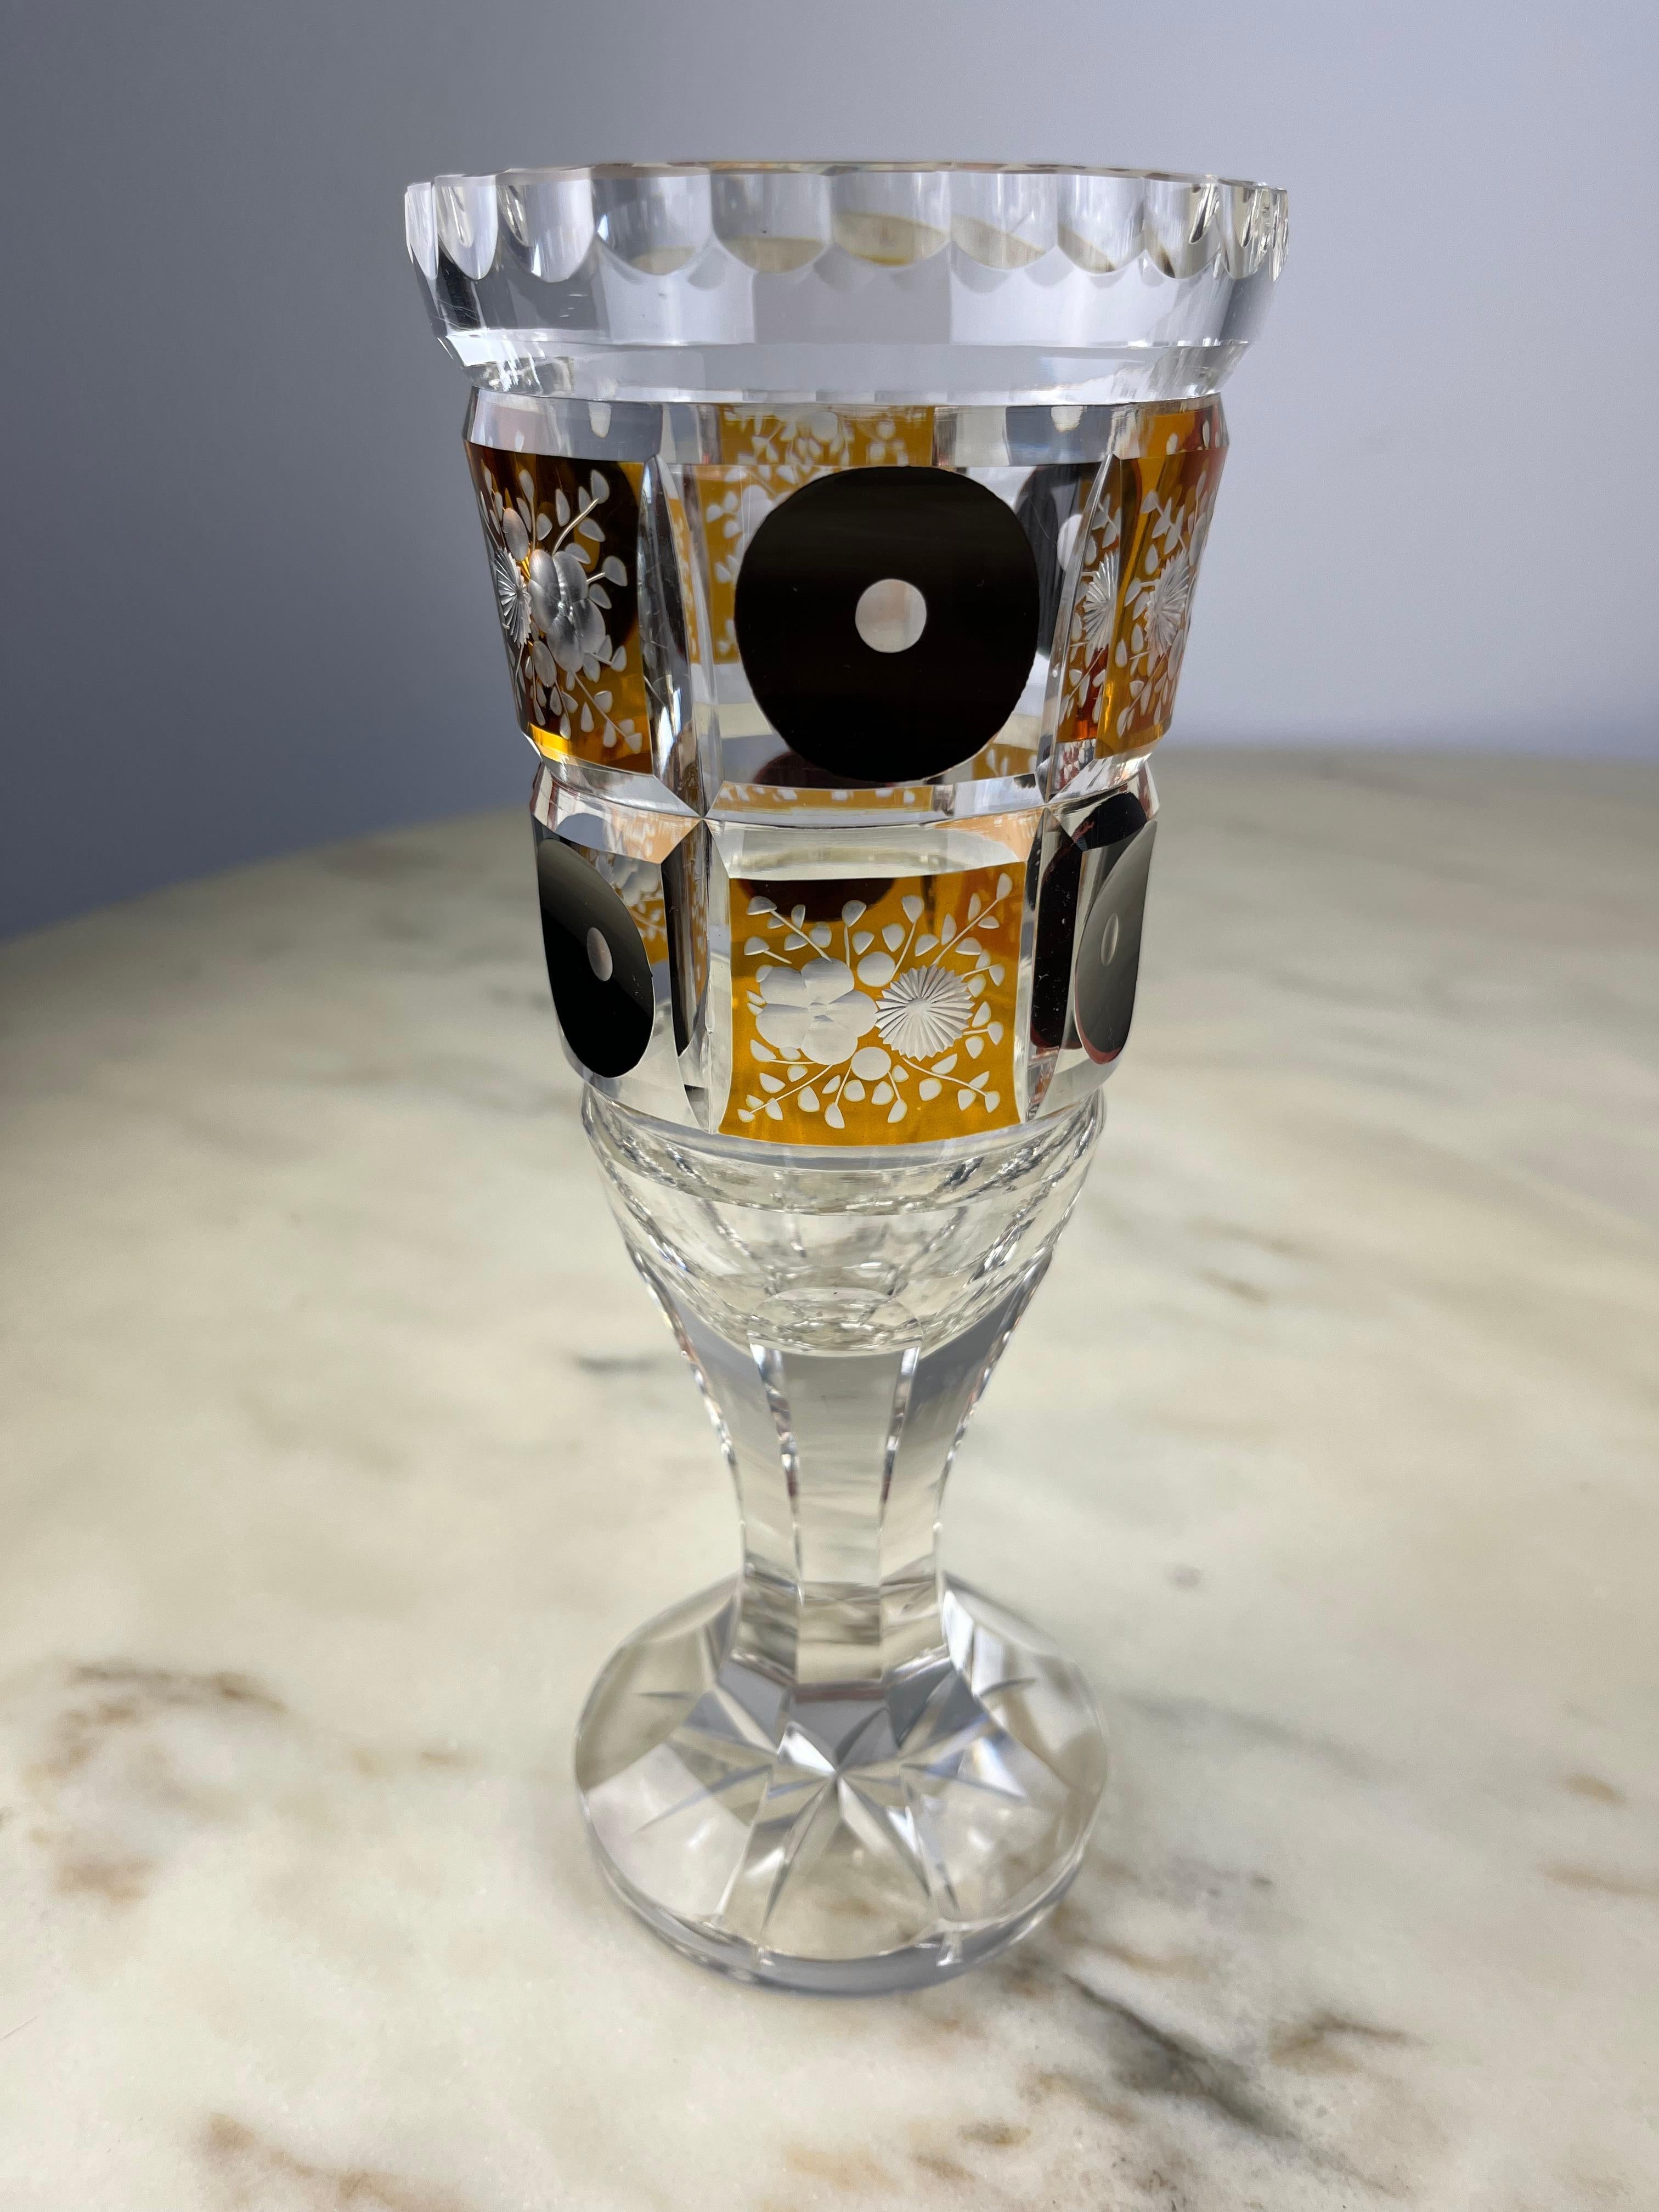 Large handcrafted Murano glass goblet, Italy, 1980s.
Belonged to my grandparents, purchased and always displayed without being used. Intact, very small signs of ageing.

We guarantee adequate packaging and will ship via DHL, insuring the contents